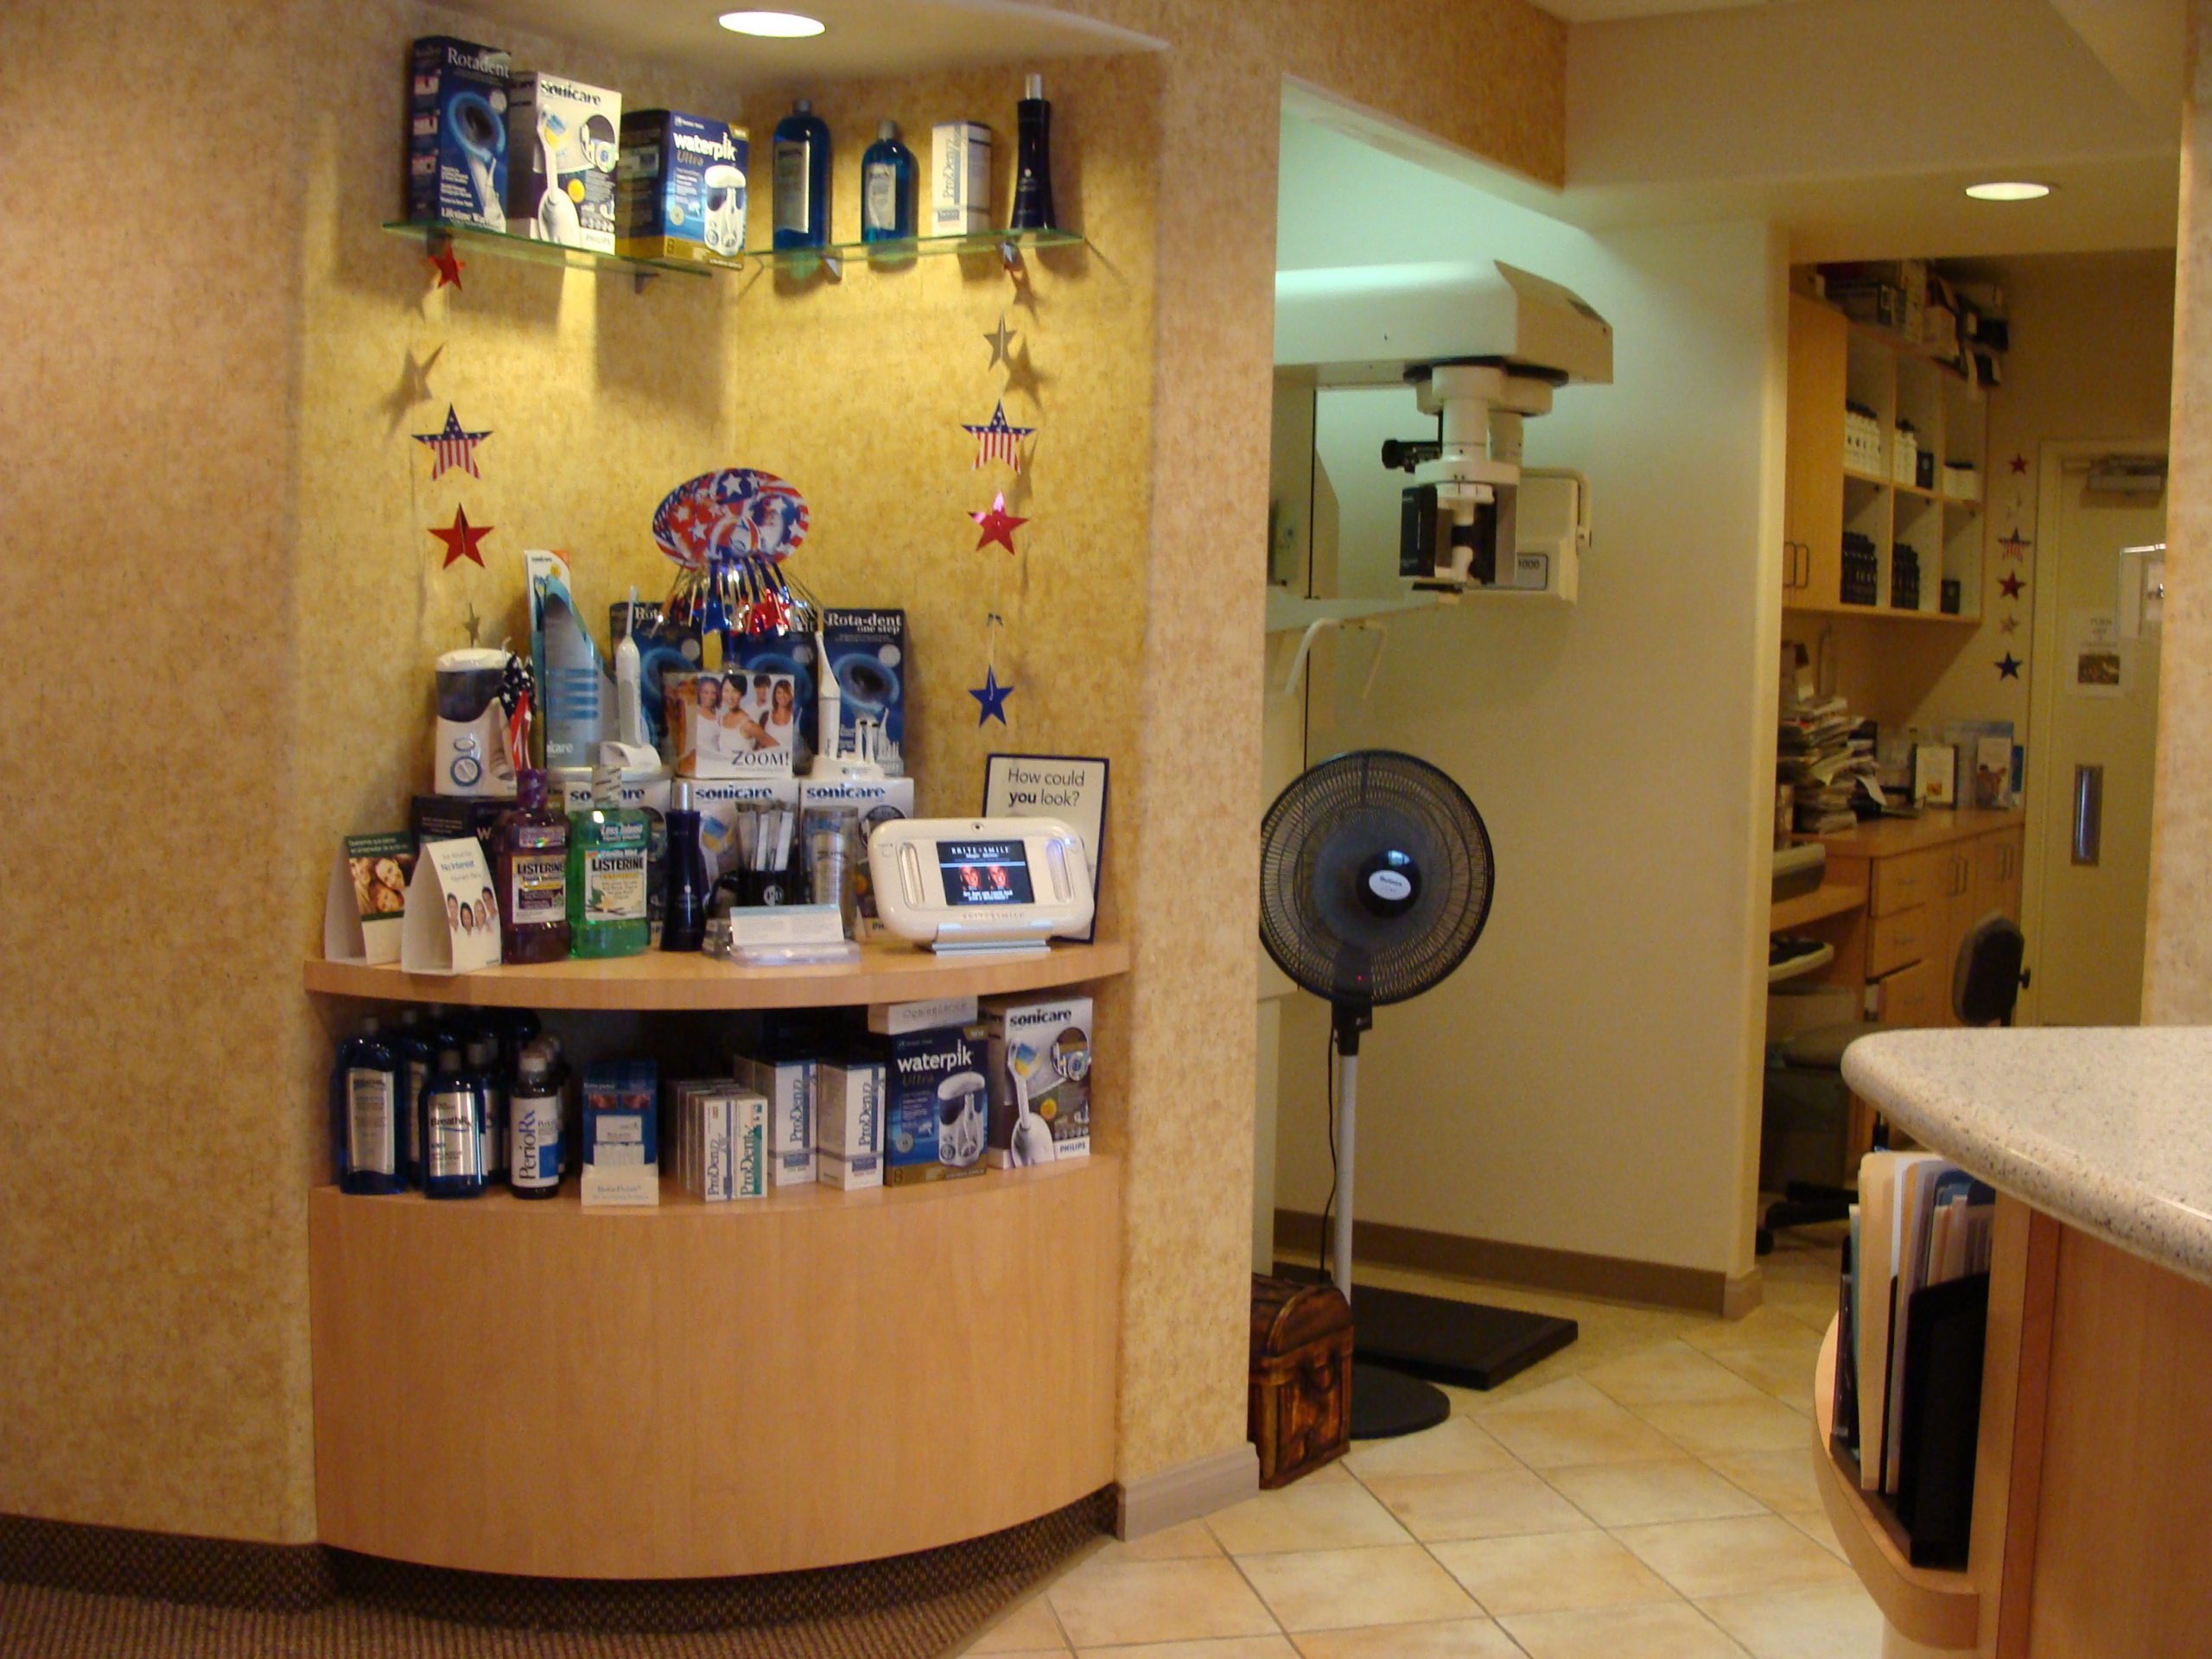 Product Counter